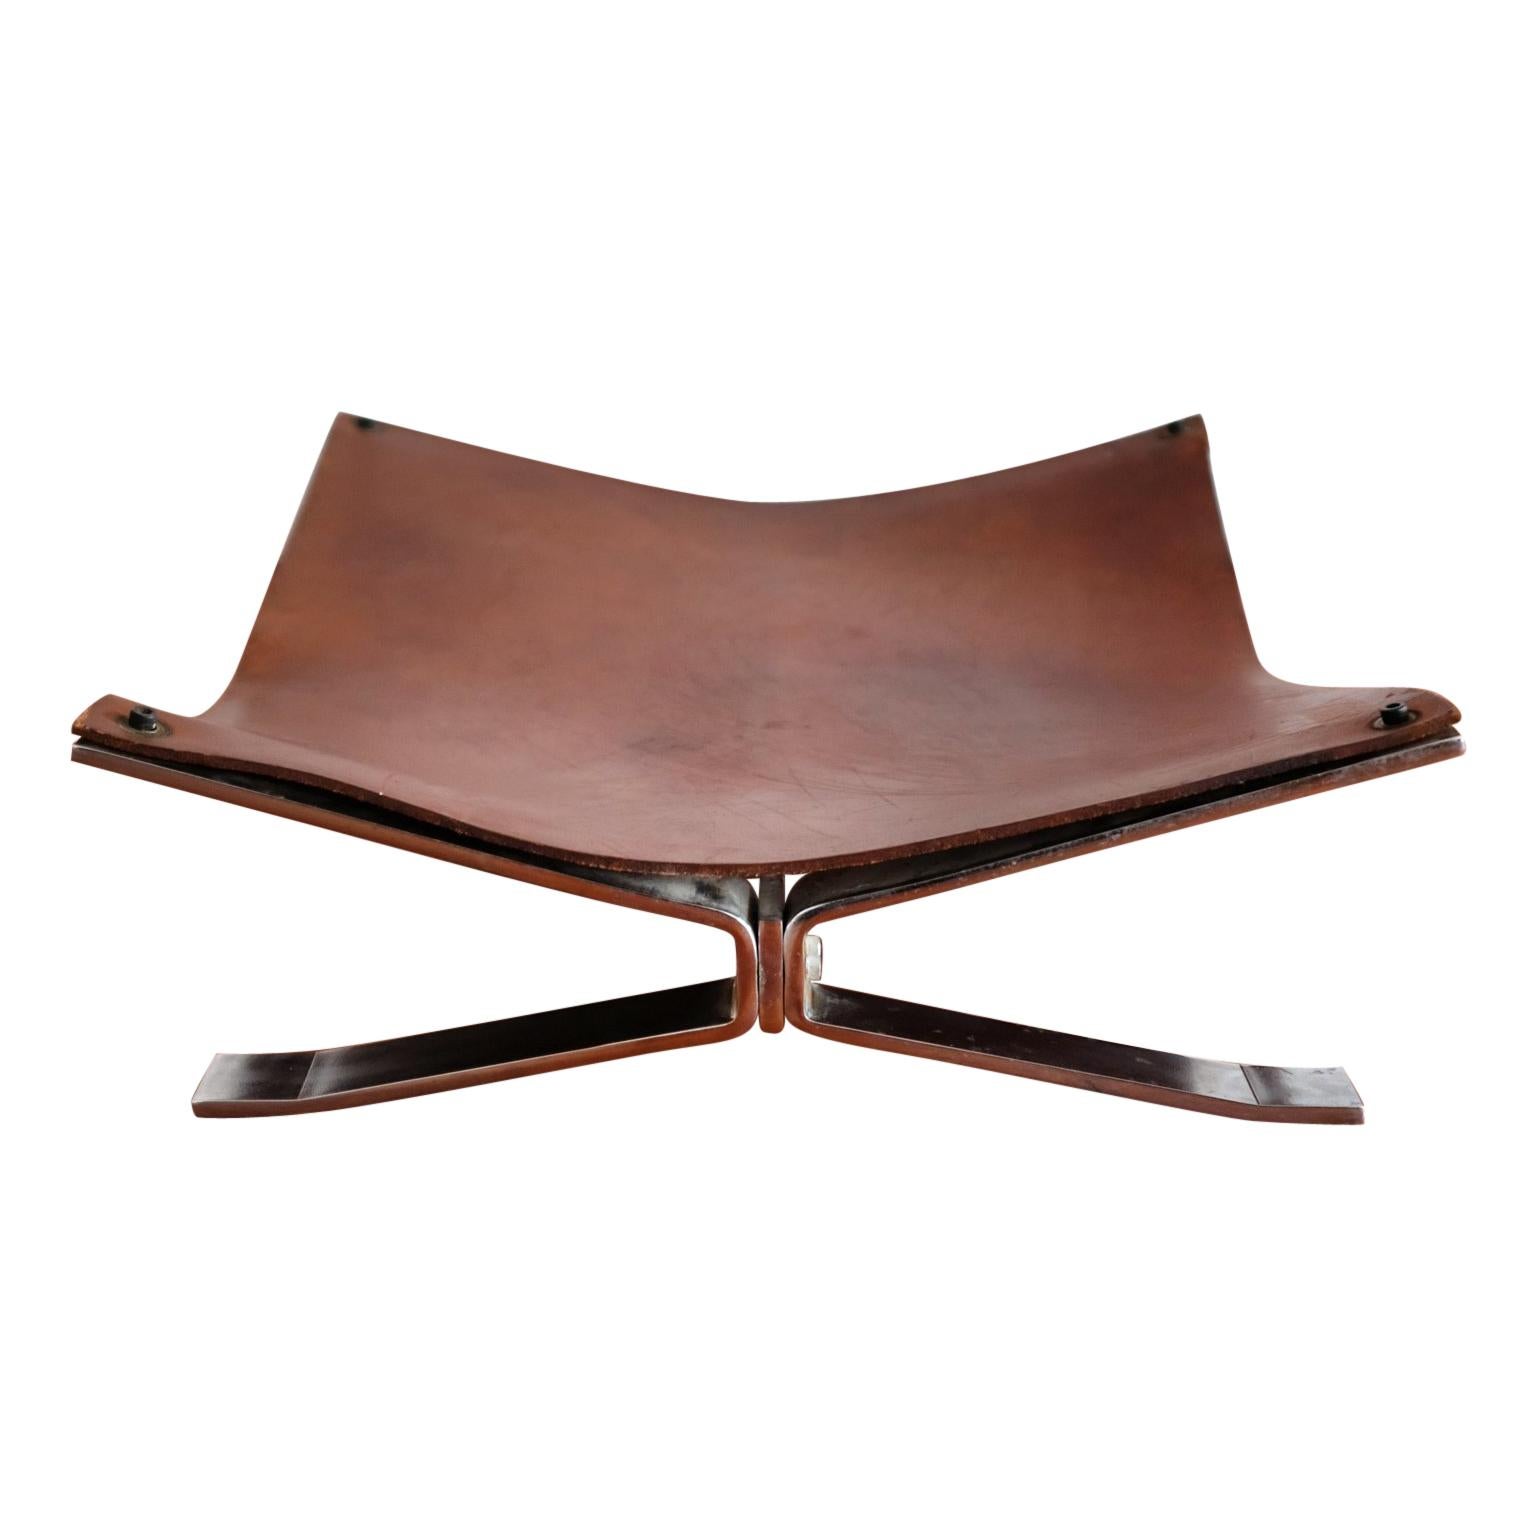 Italian Leather Log Holder or Magazine Rack by Alessandro Albrizzi, 1960s